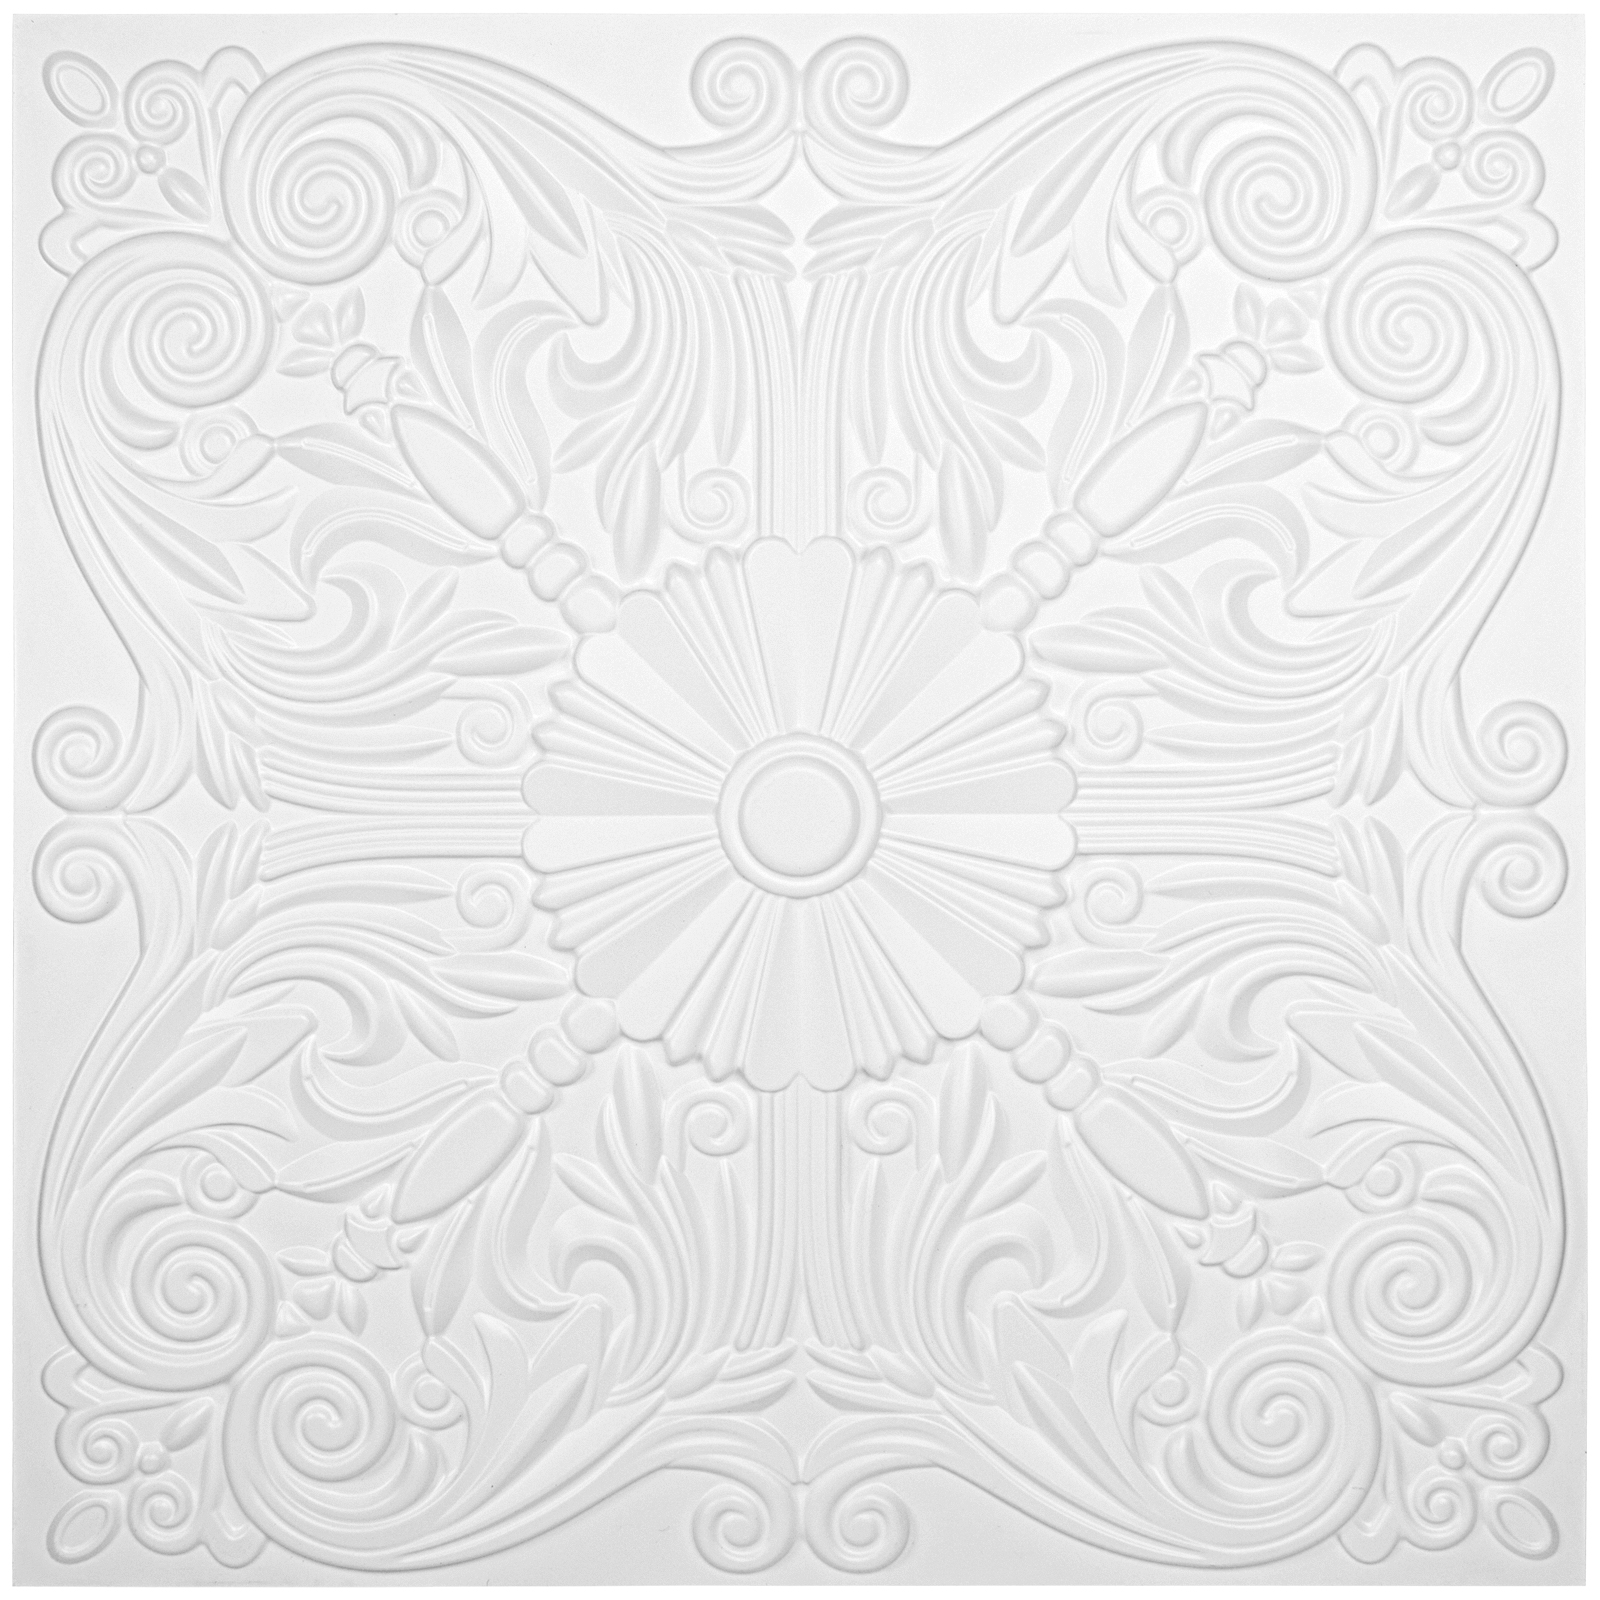 A10904P12WT -Decorative Ceiling Tile 2x2 Glue up, Lay in Ceiling Tile 24x24 Pack of 12pcs Spanish Floral in Matt White